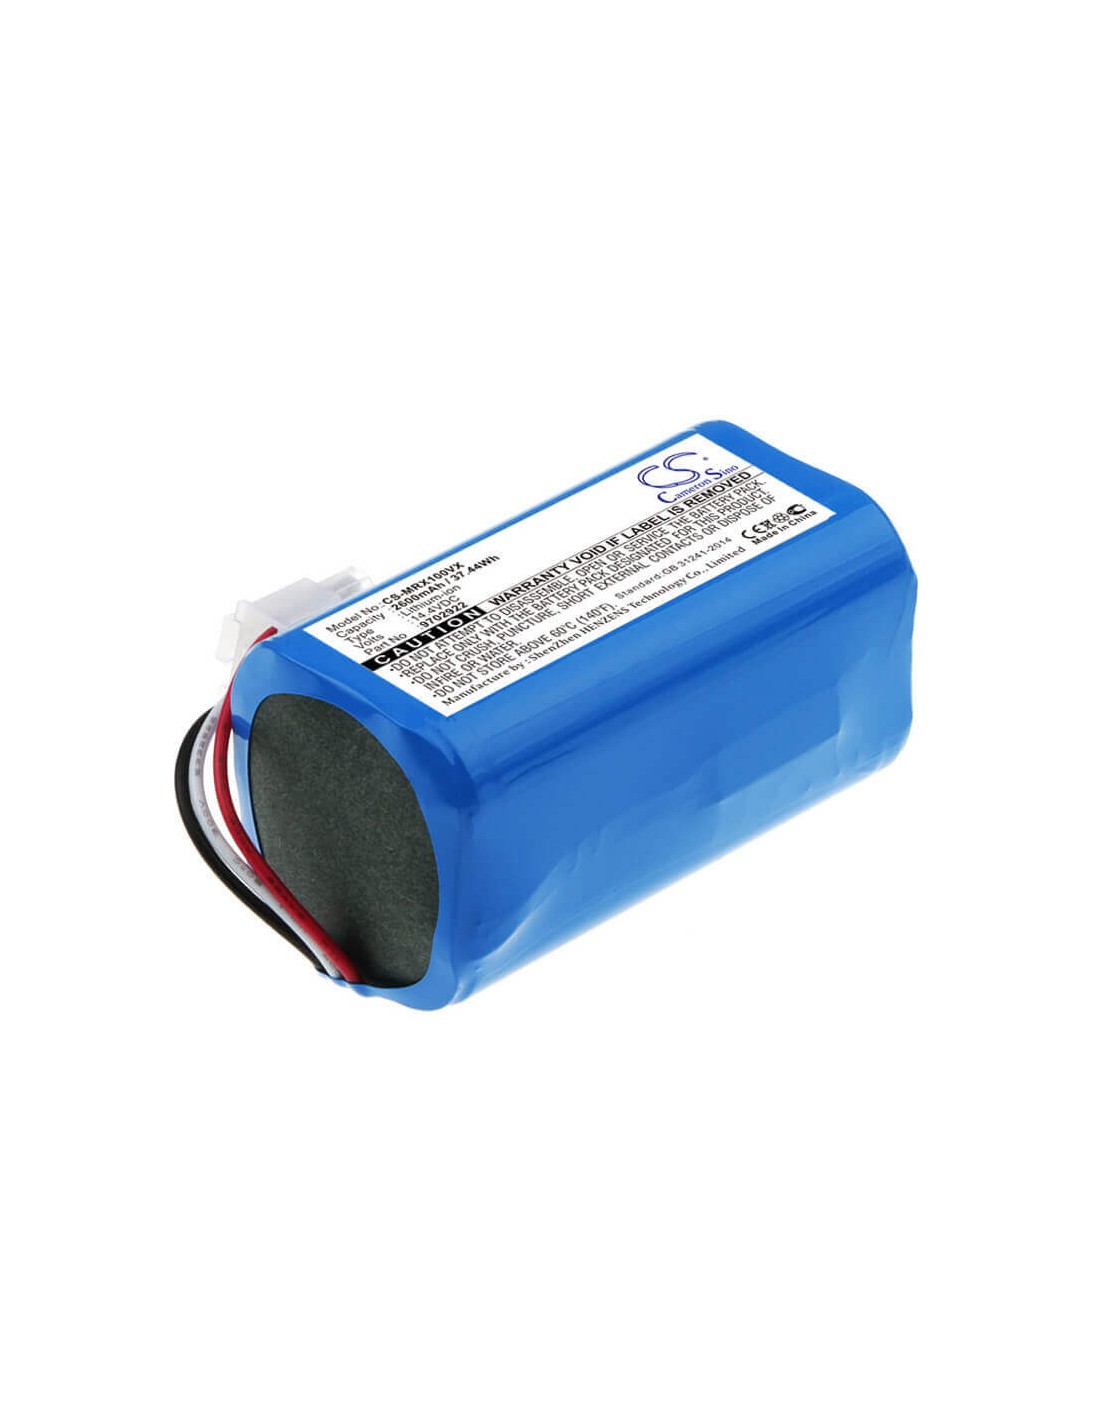 Battery for Miele, Rx1-sjql0, Scout Rx1 14.4V, 2600mAh - 37.44Wh